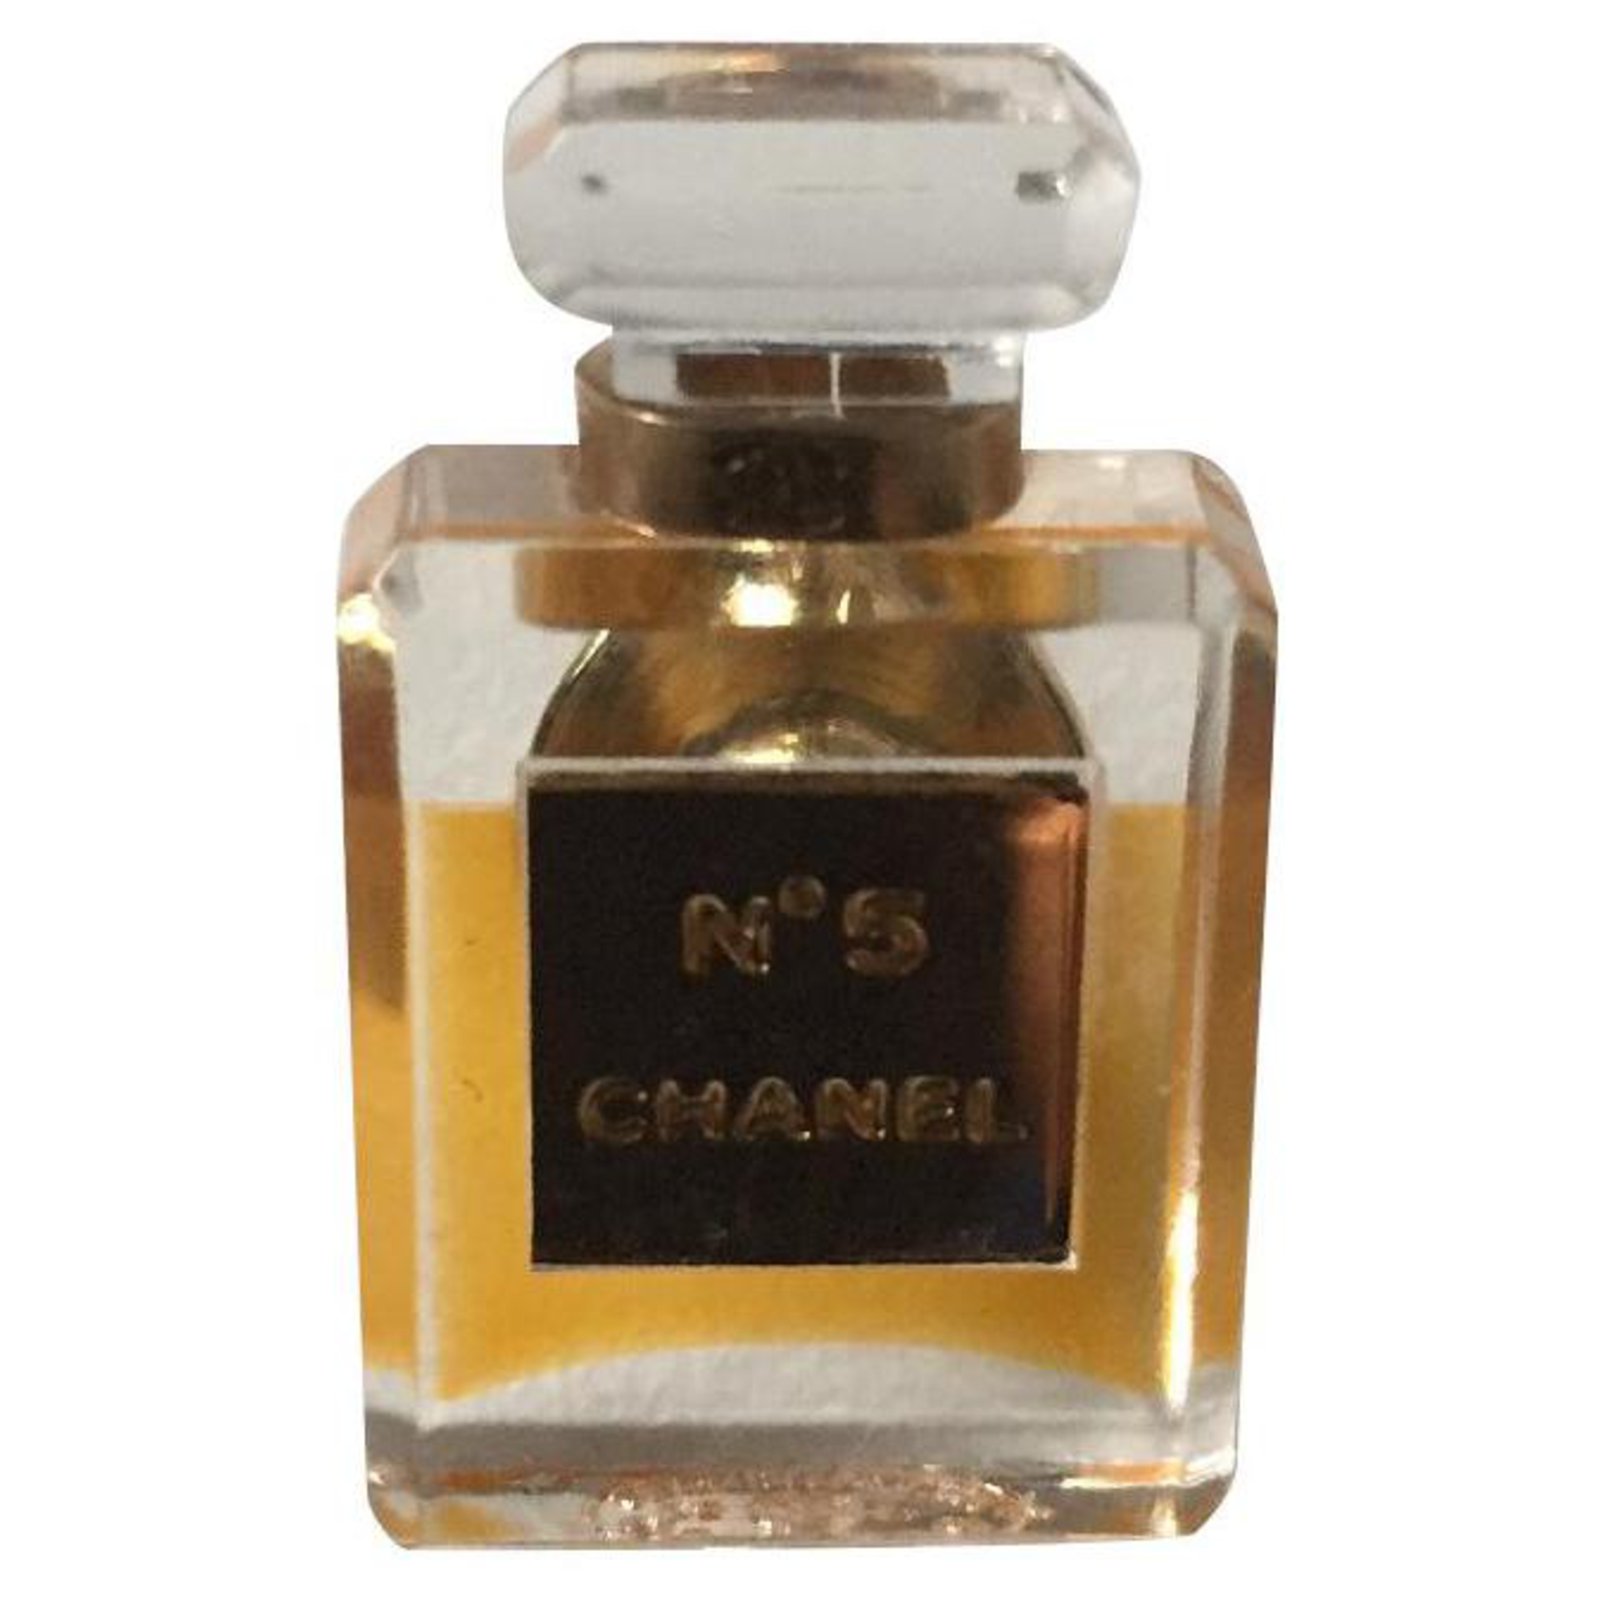 CHANEL Vintage Iconic No.5 Miniature Perfume Bottle Pin Brooch 